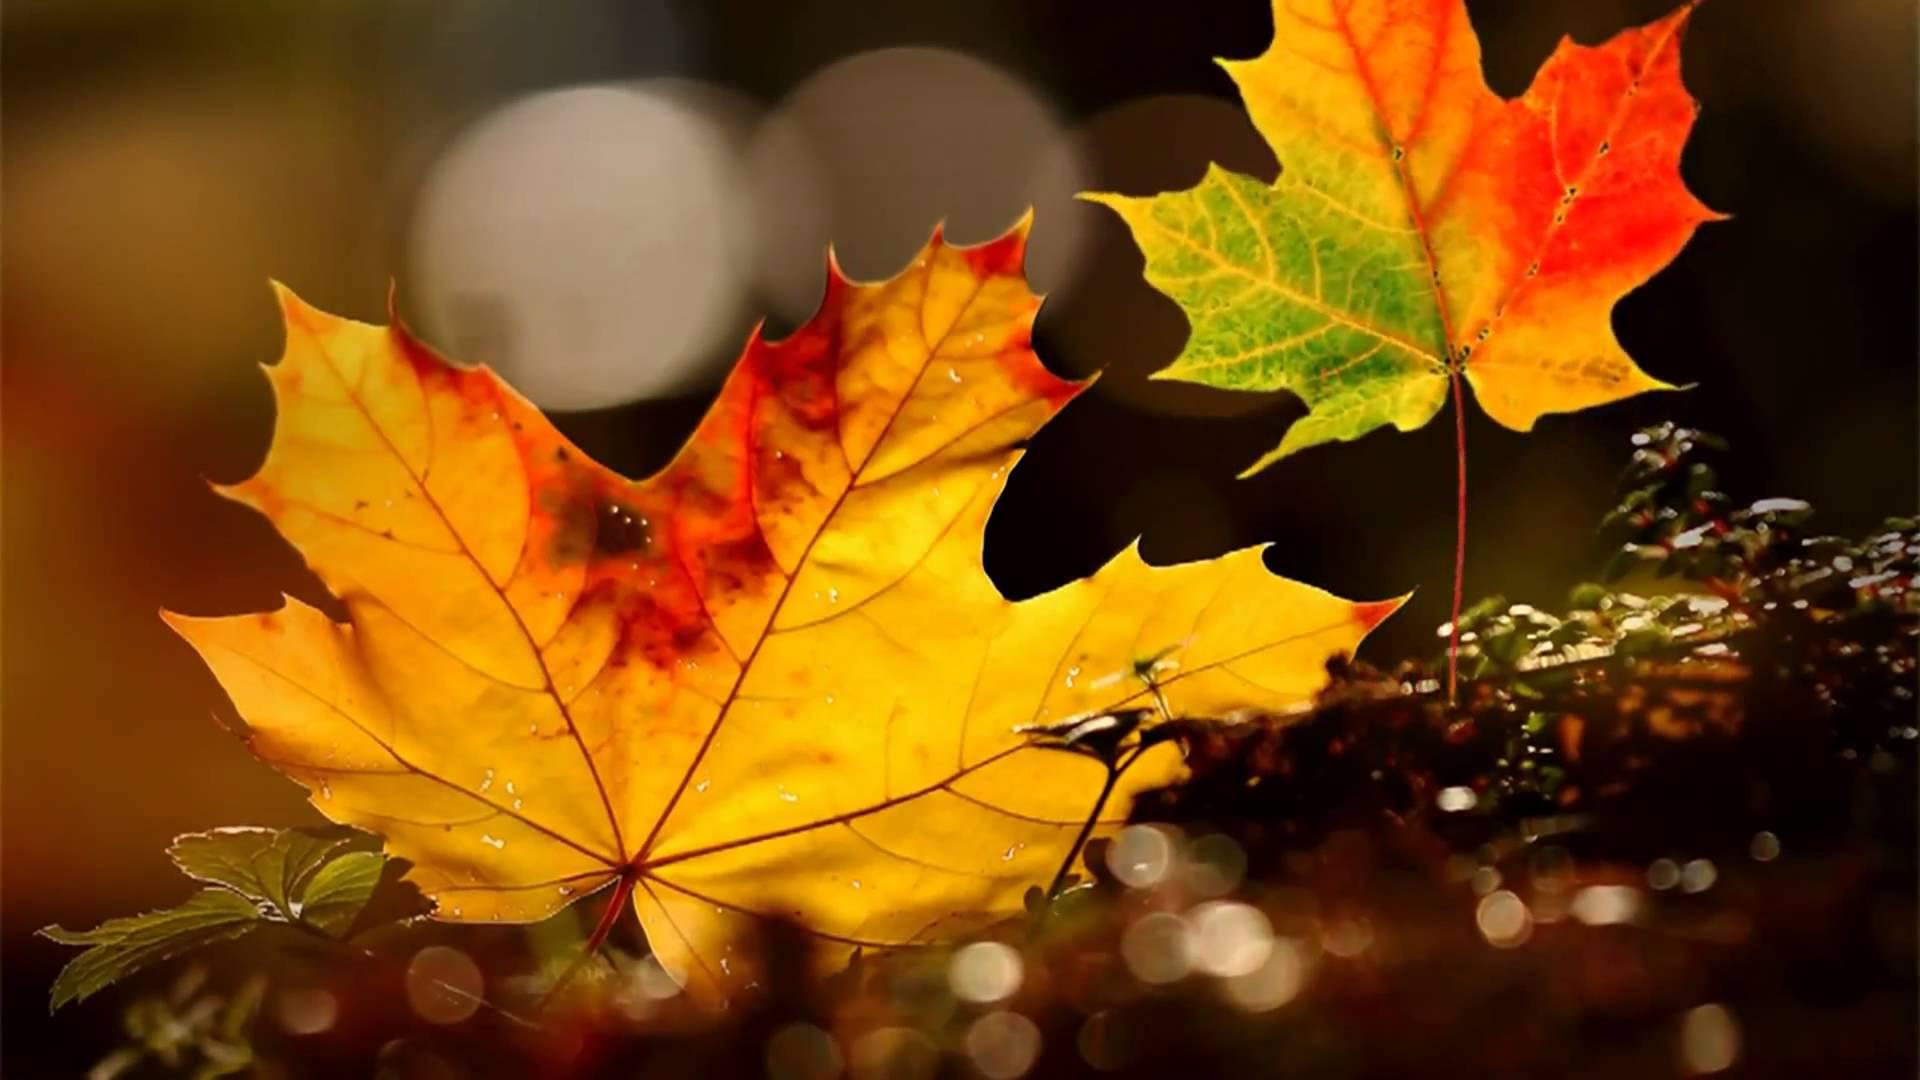 1920 x 1080 · jpeg - Autumn Leaves Hd Wallpapers - Wallpaper Cave